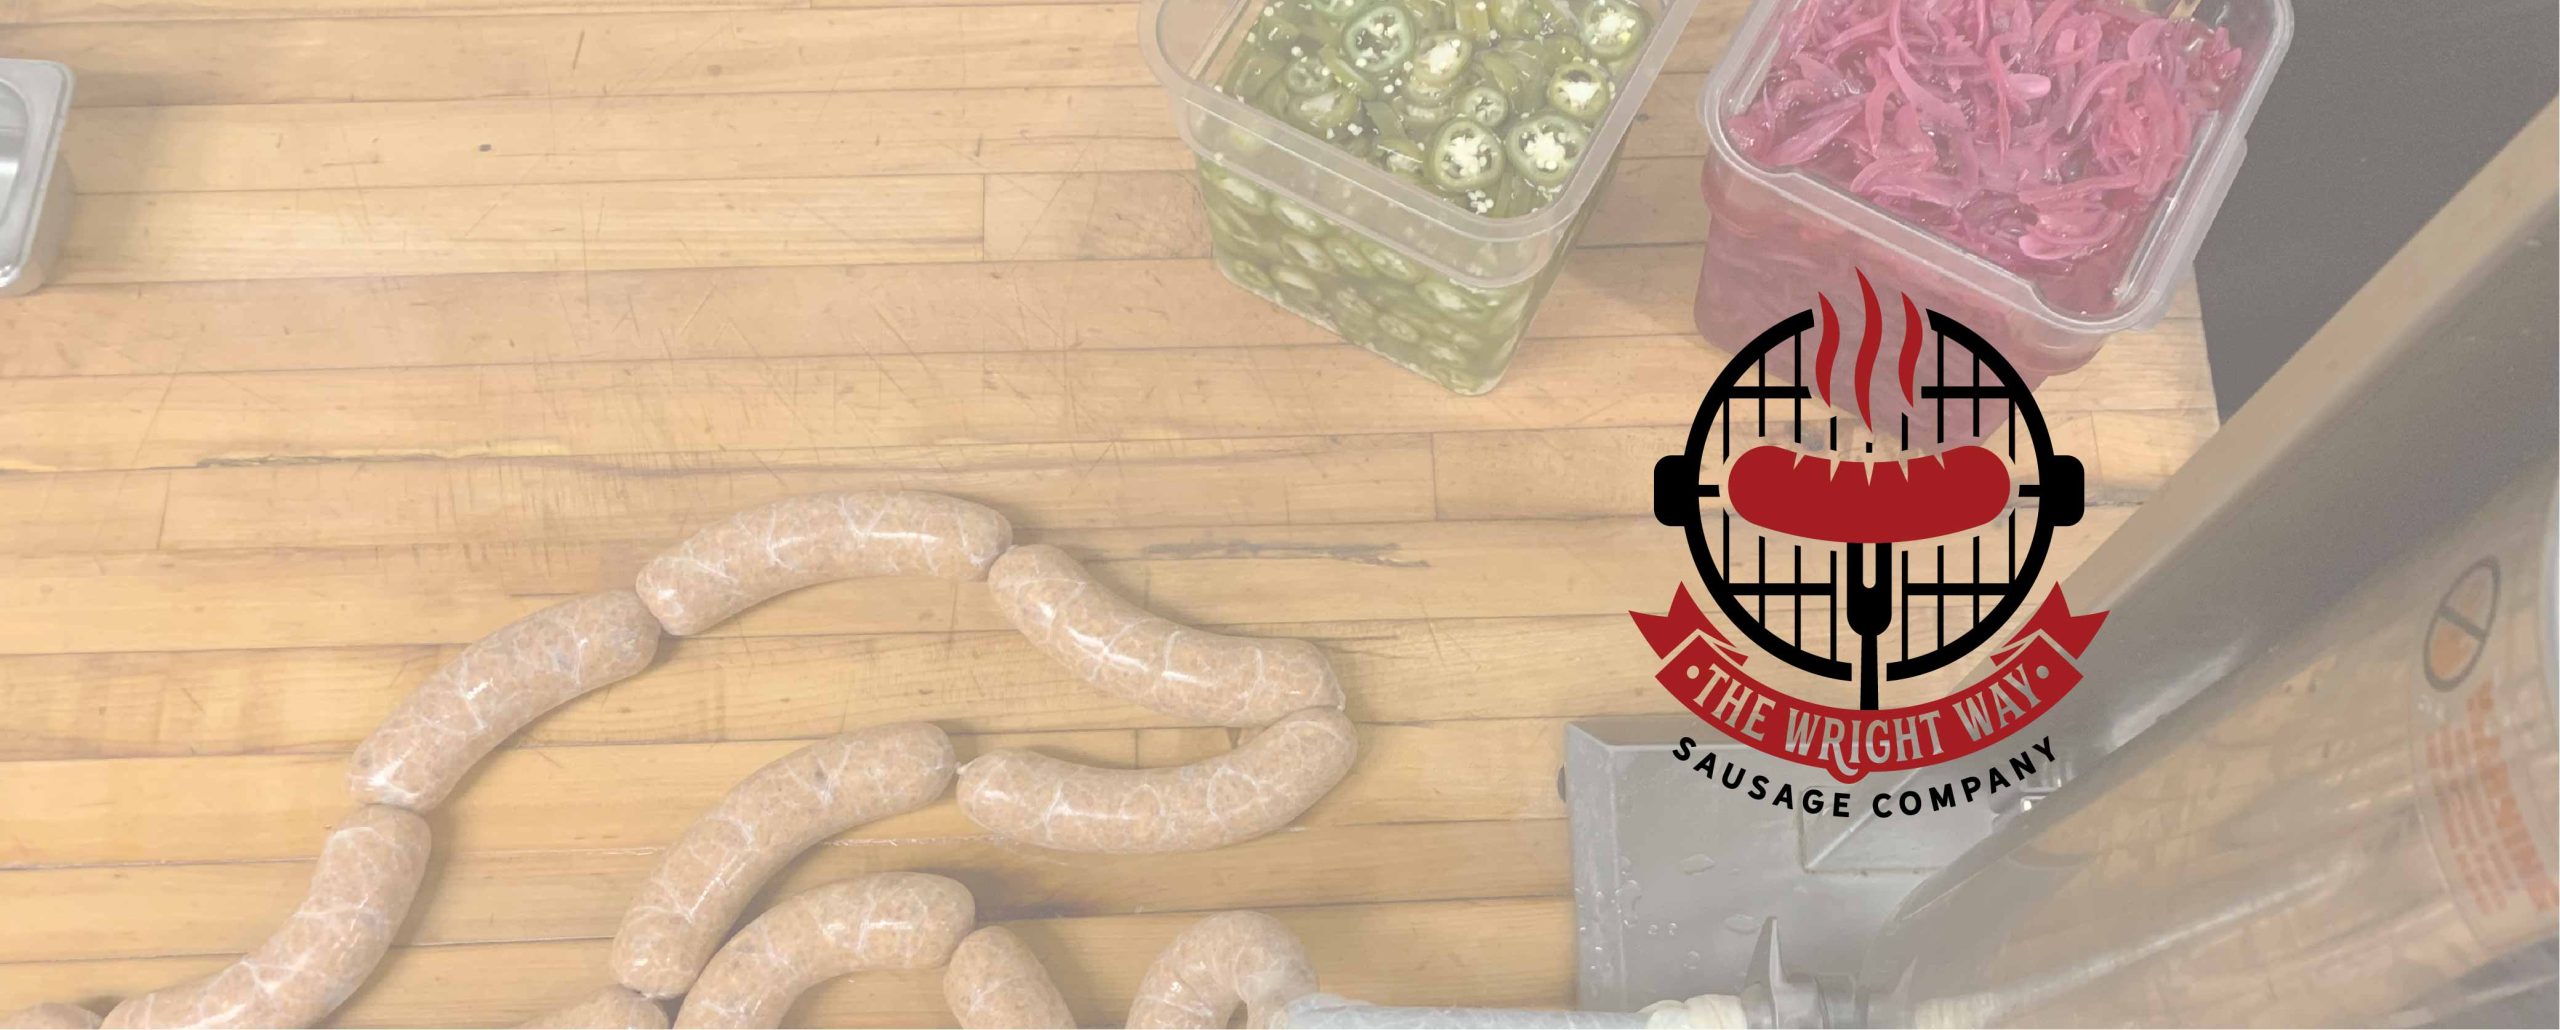 Father's Day Pop-up w/ The Wright Way Sausage Company